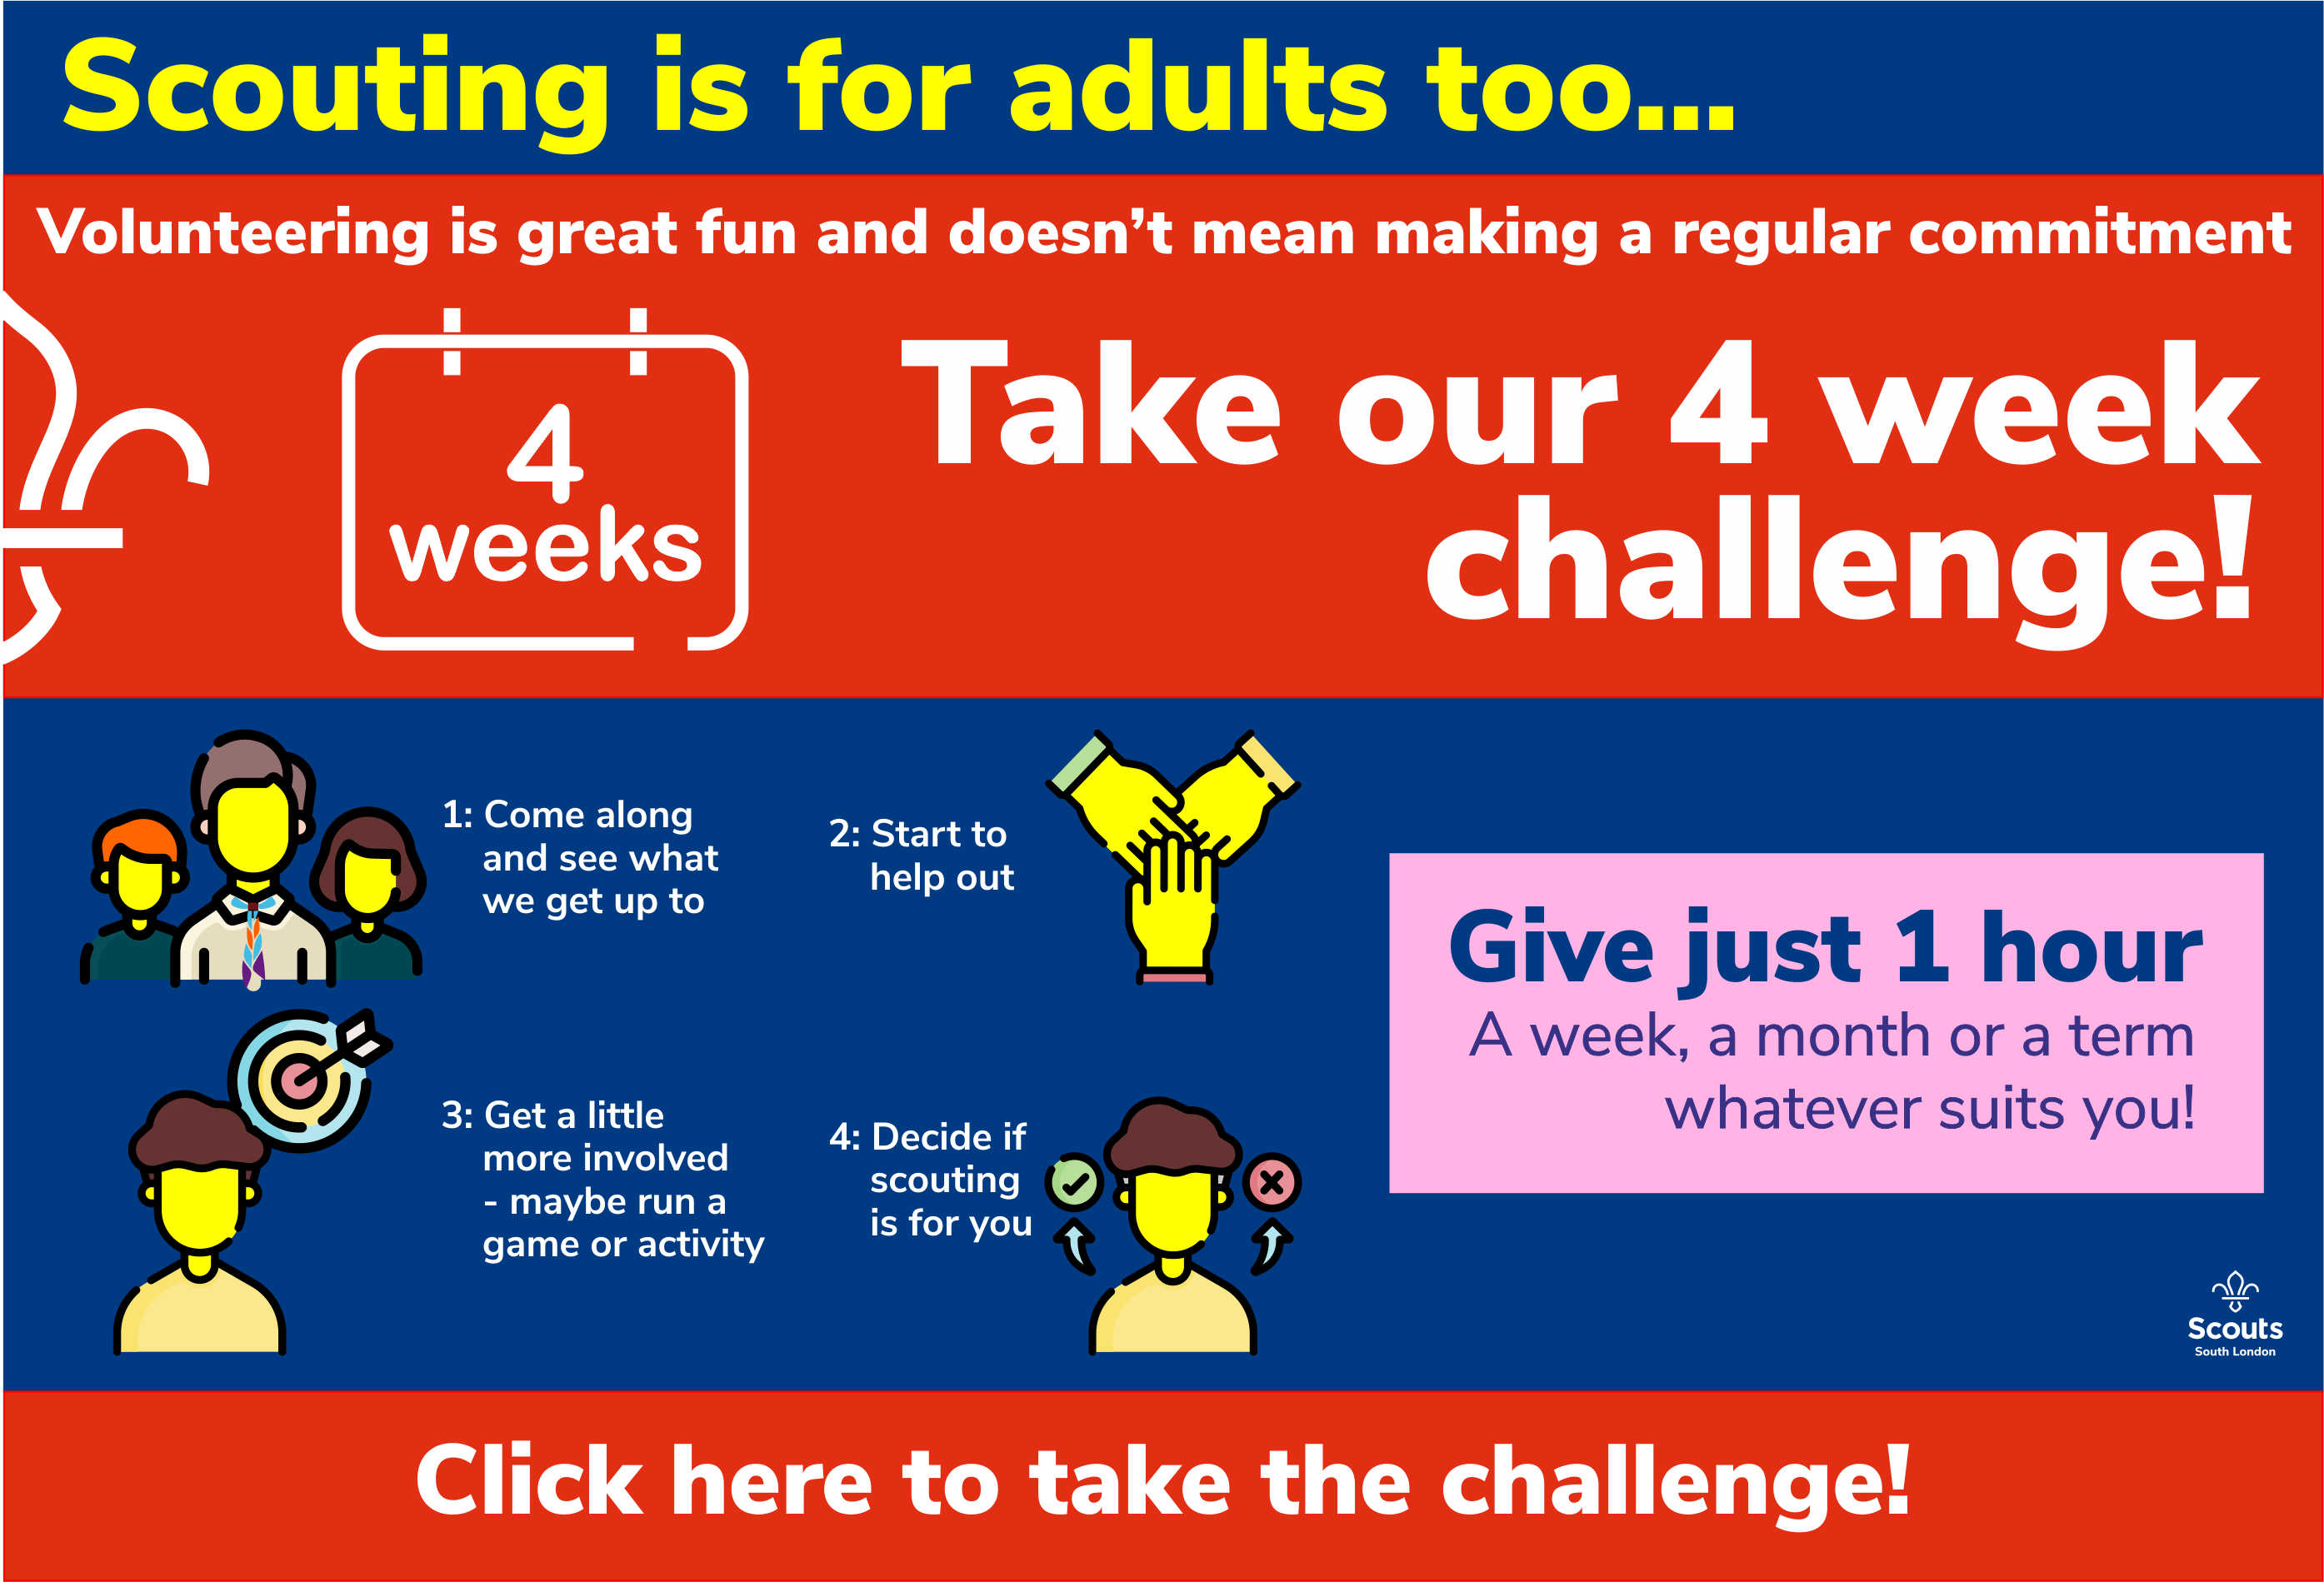 Take our 4 week challenge...